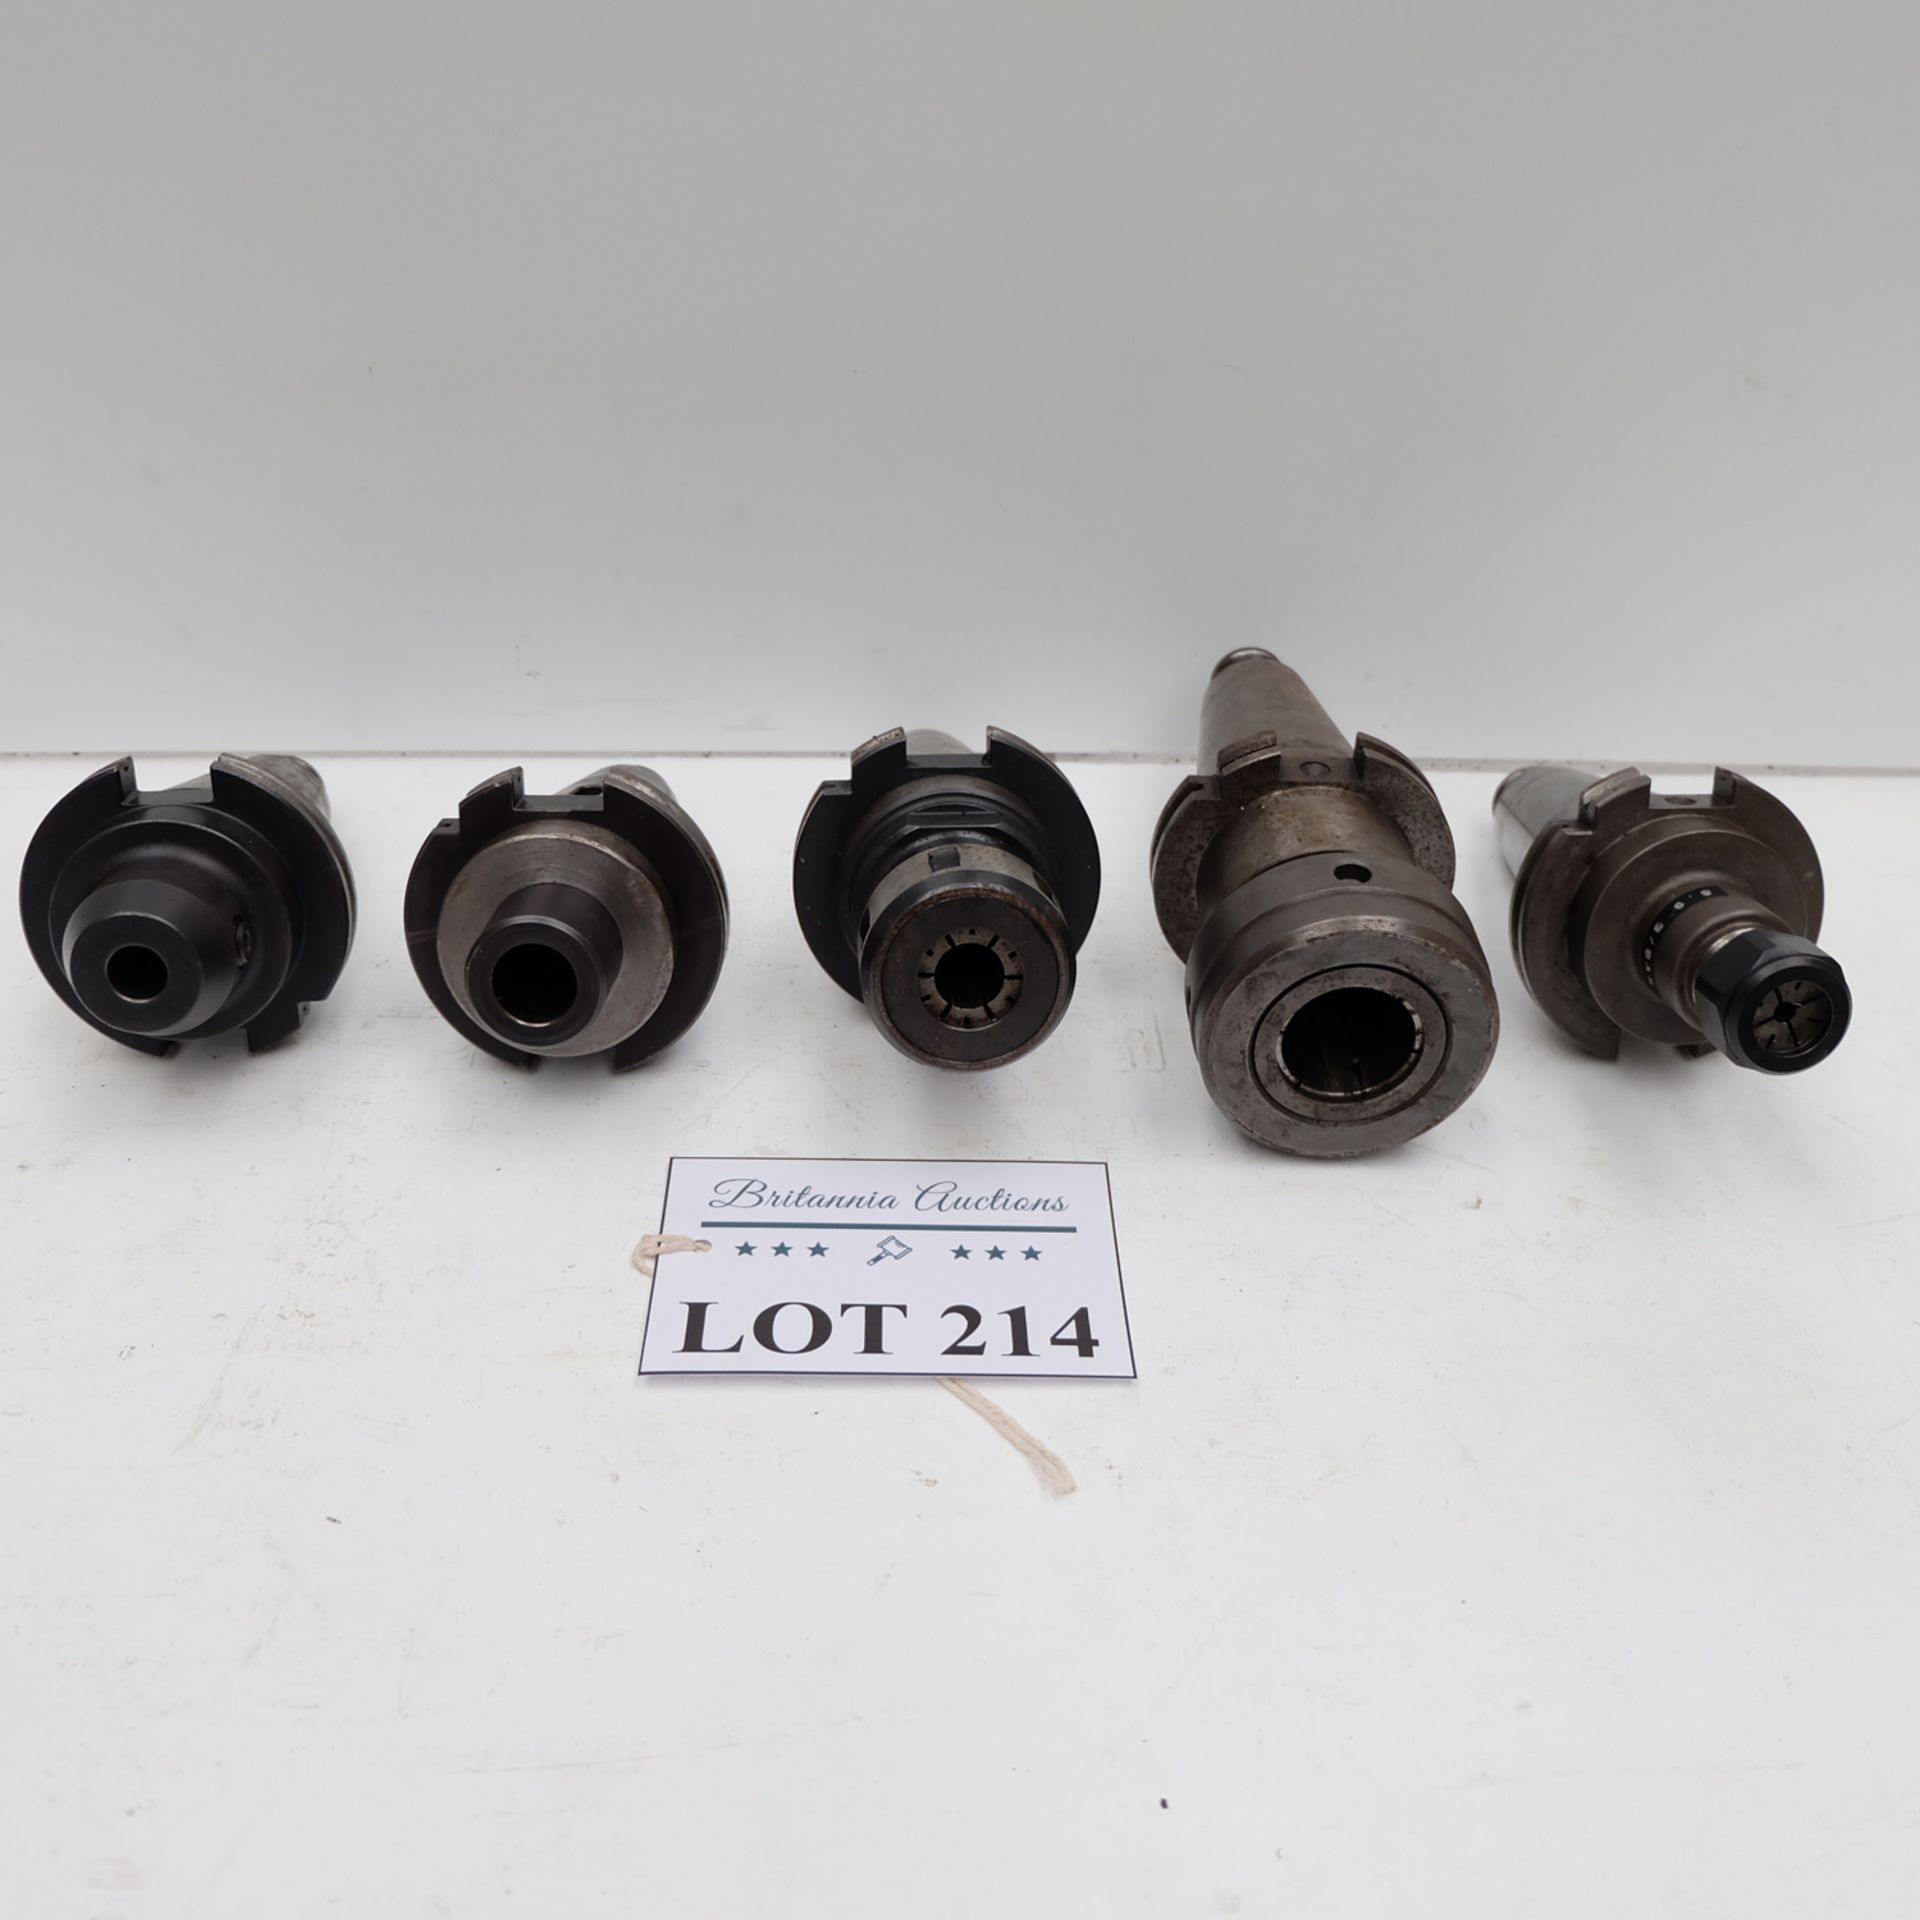 Quantity of 5 x SK 50 Spindle Tooling. - Image 3 of 3